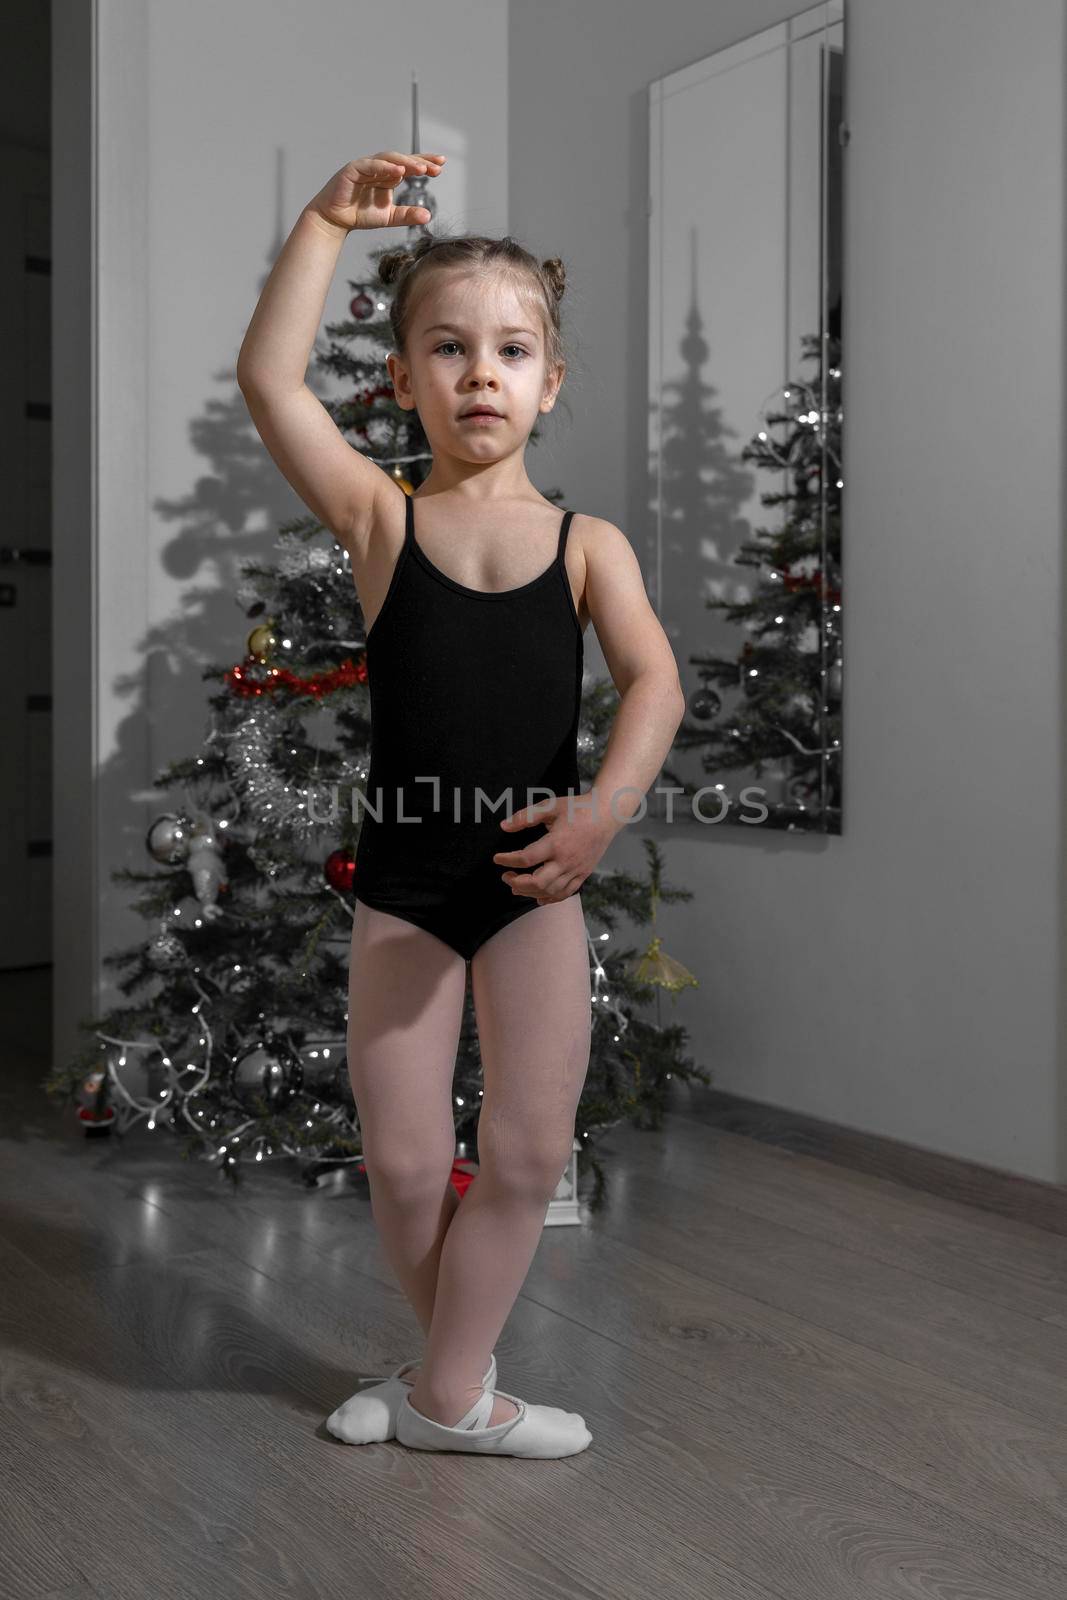 5-year-old girl dancing on Christmas evening by the tree